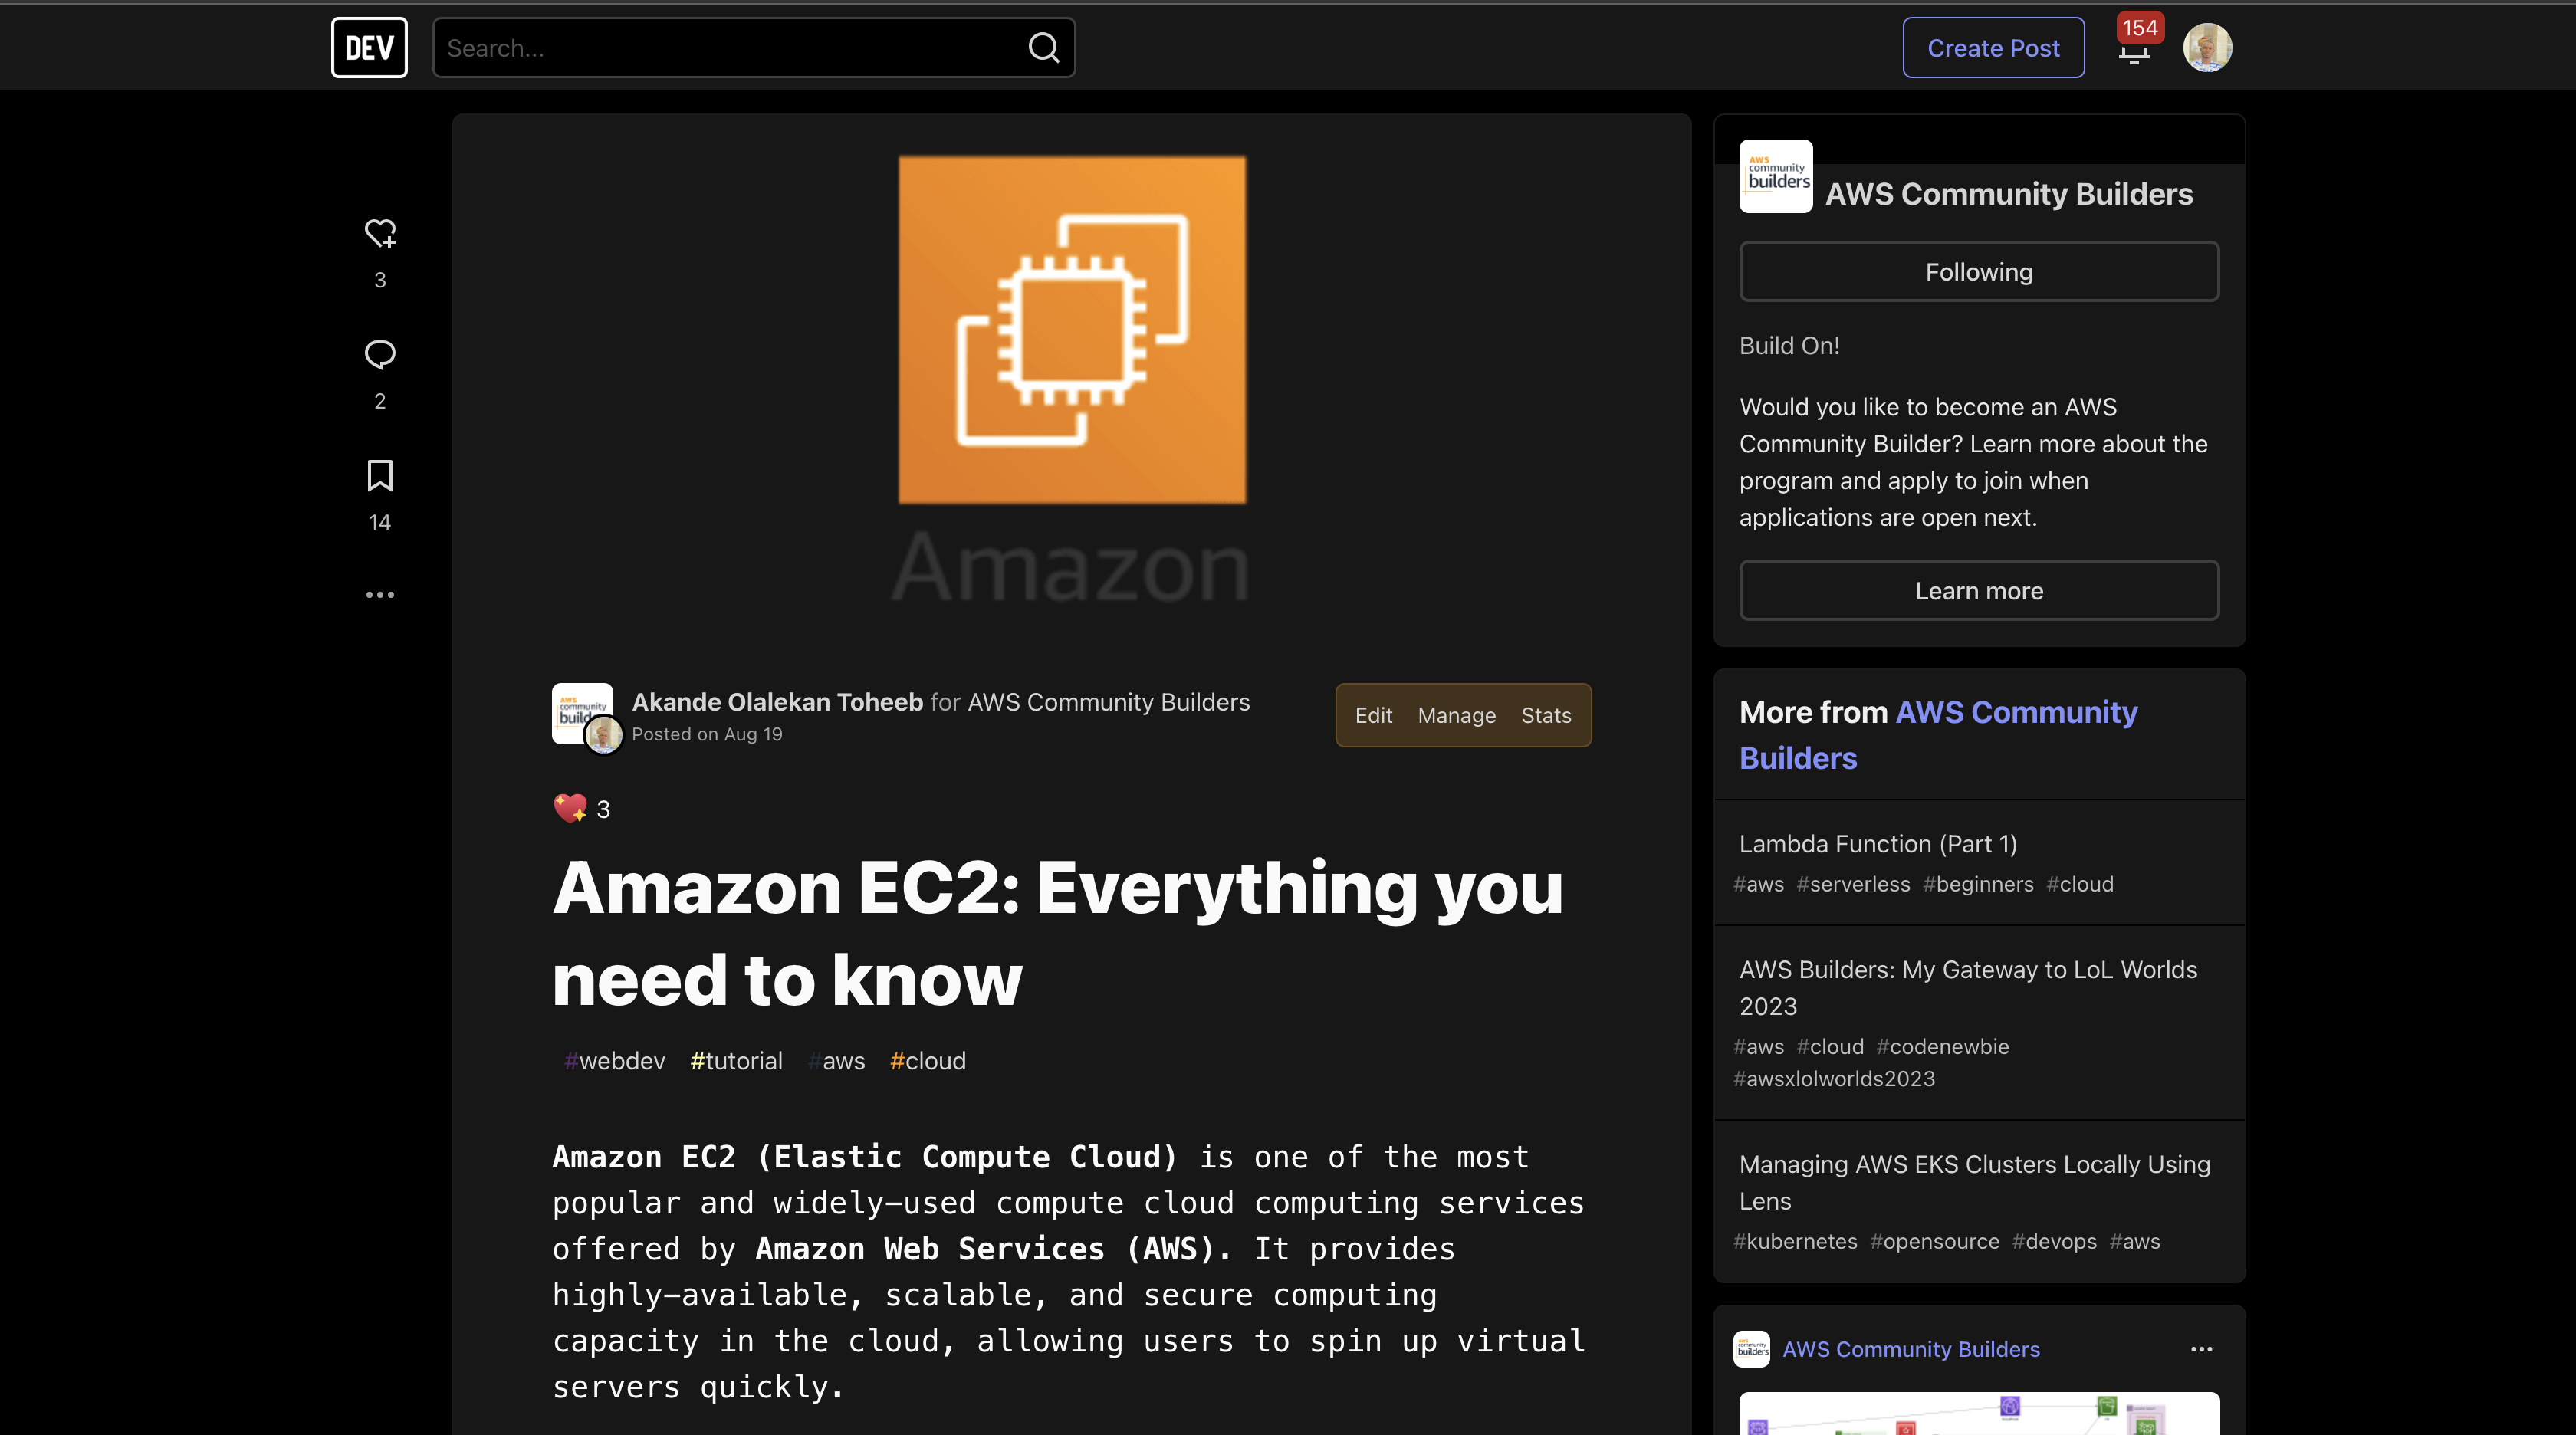 Amazon EC2: Everything you need to know